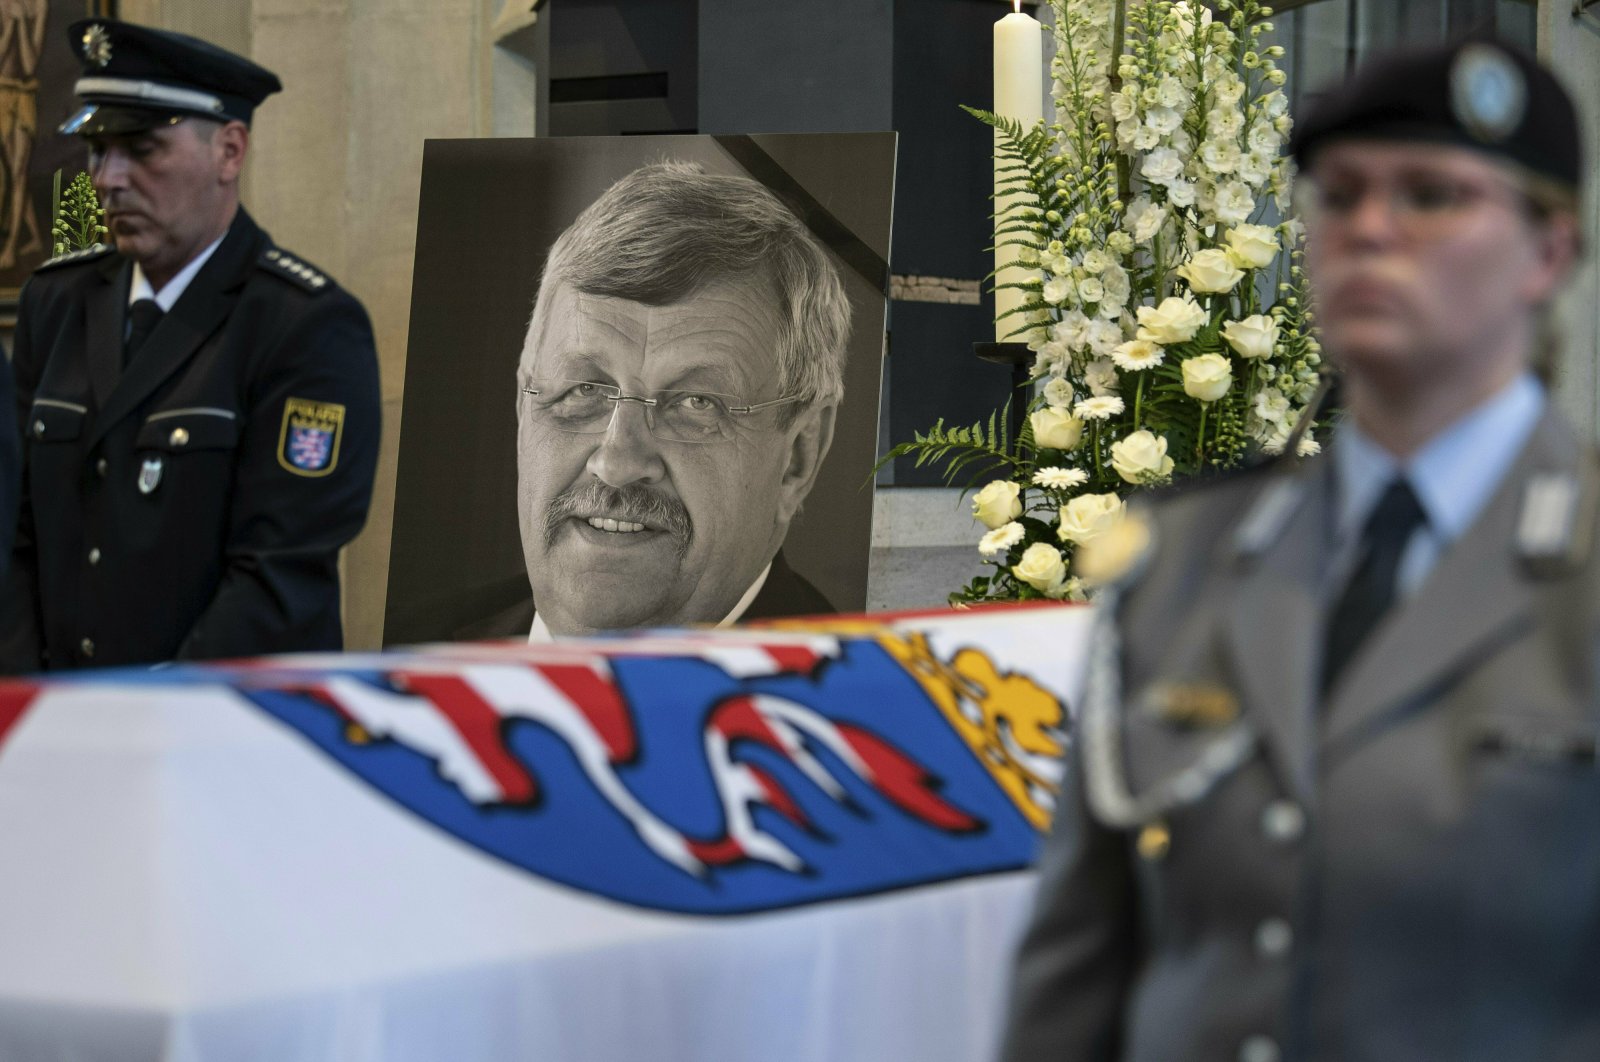 In this file photo a picture of Walter Luebcke stands behind his coffin during the funeral service in Kassel, Germany, June 13, 2019. (AP Photo)